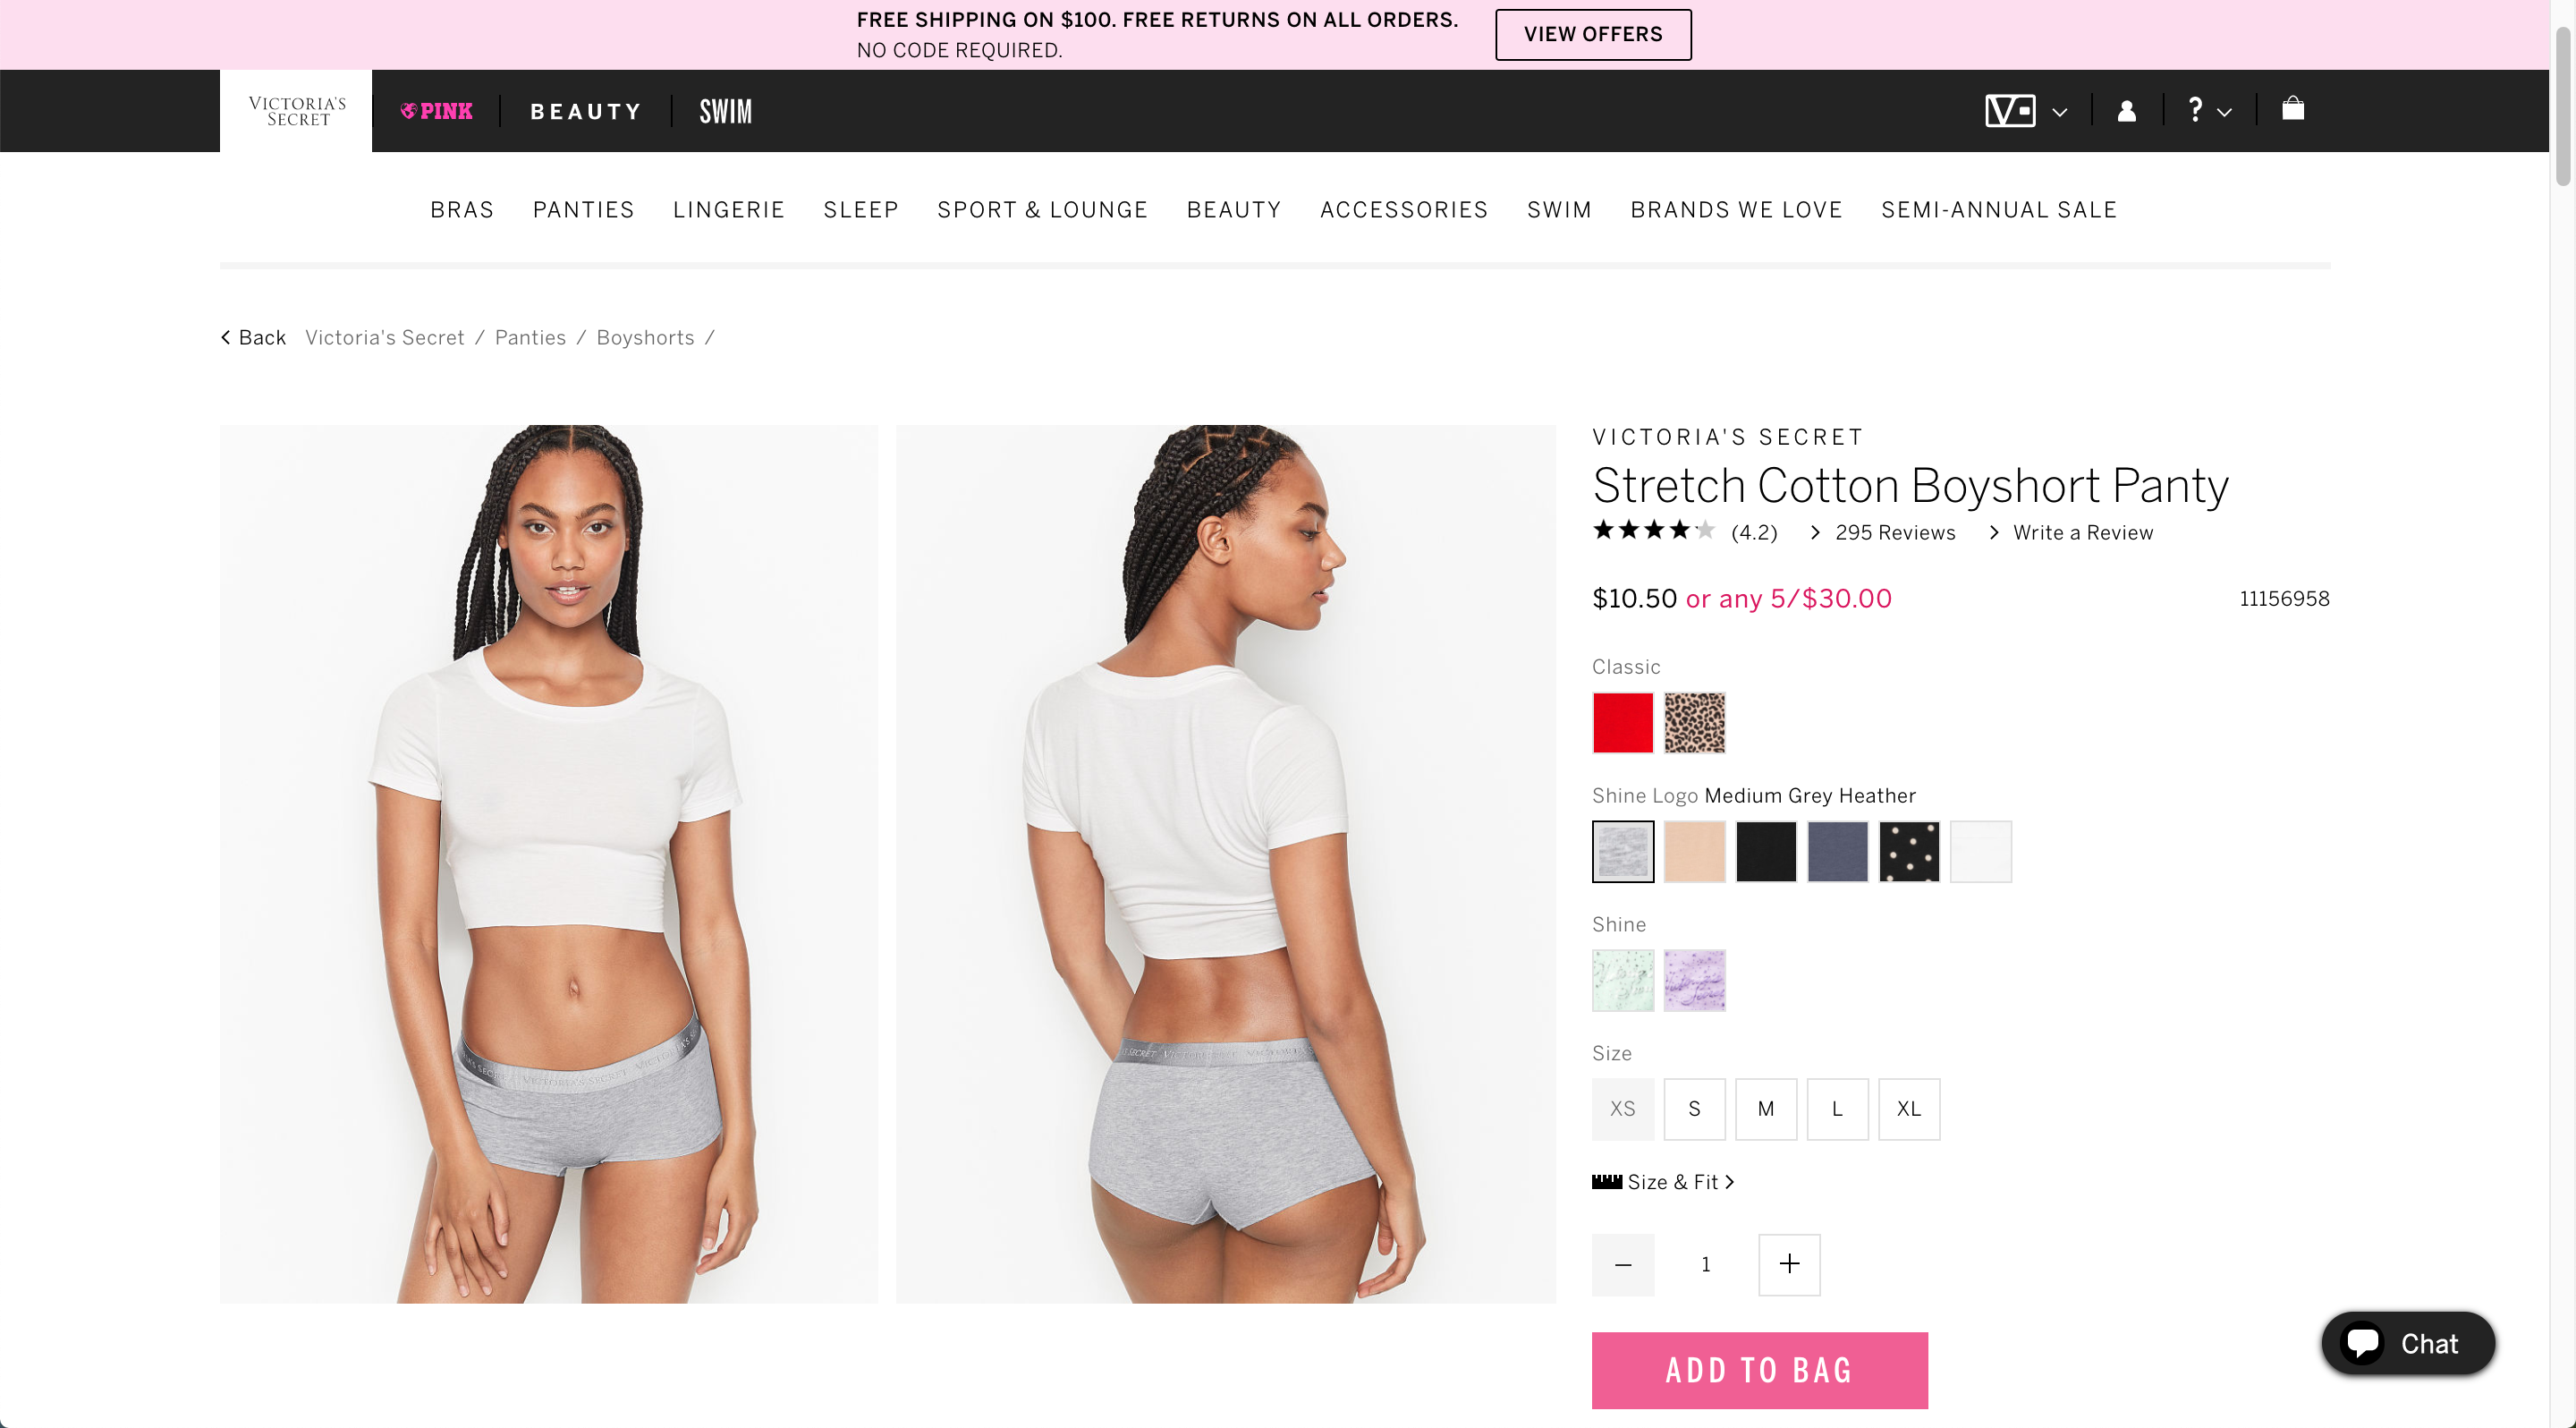 How to Take Photos of Clothing for Your Online Store